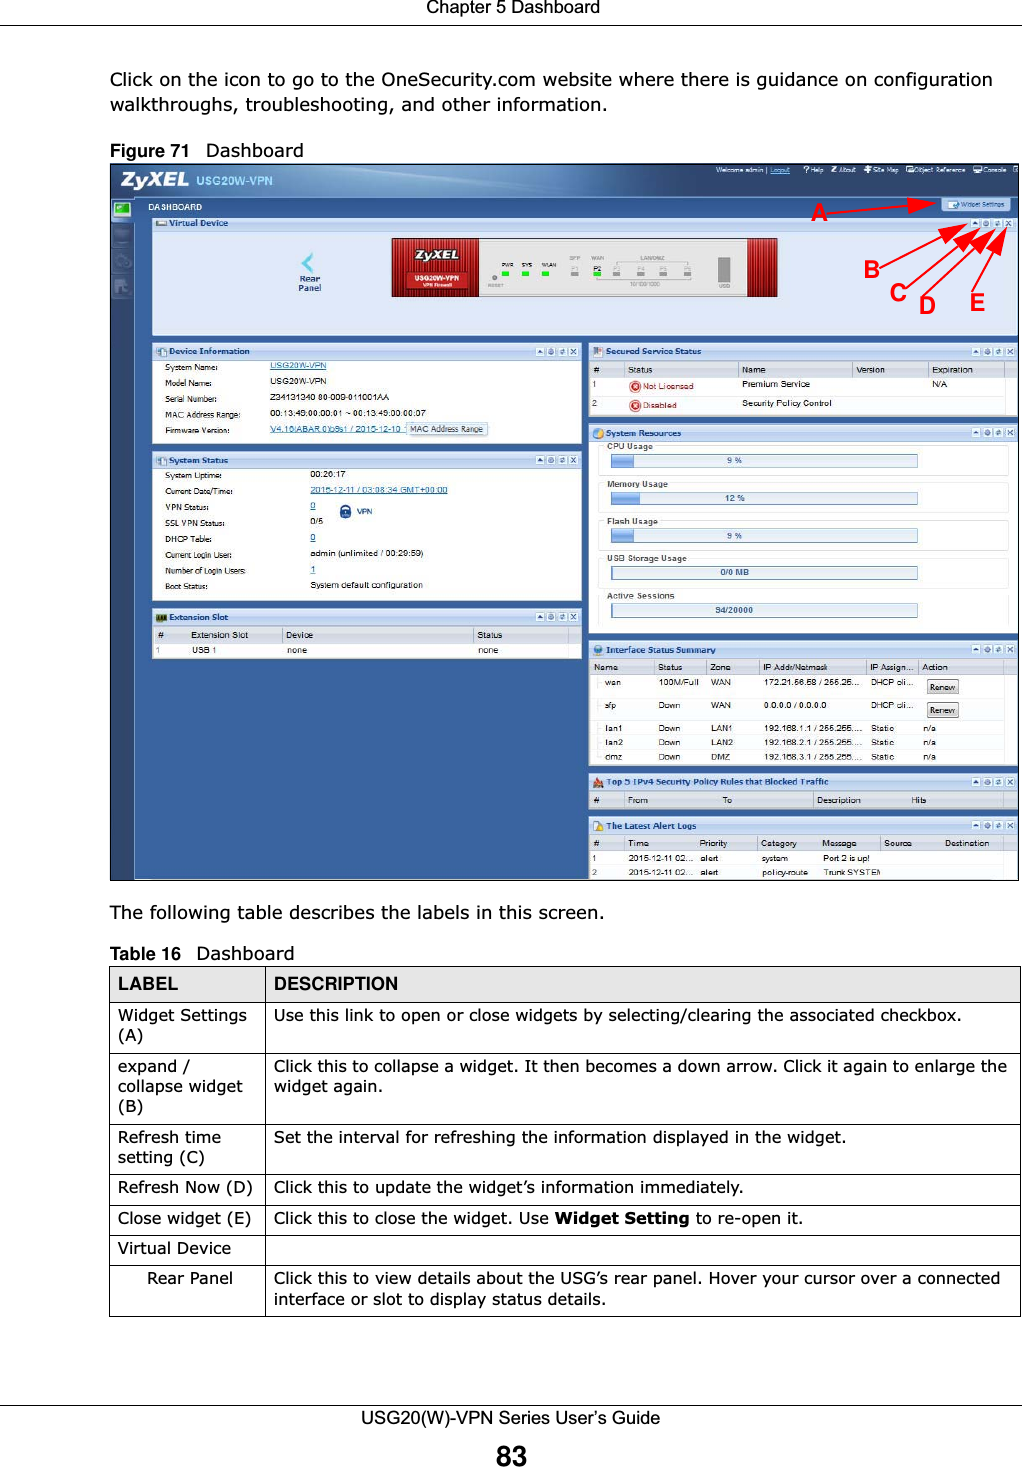  Chapter 5 DashboardUSG20(W)-VPN Series User’s Guide83Click on the icon to go to the OneSecurity.com website where there is guidance on configuration walkthroughs, troubleshooting, and other information.Figure 71   Dashboard  The following table describes the labels in this screen.Table 16   DashboardLABEL DESCRIPTIONWidget Settings (A) Use this link to open or close widgets by selecting/clearing the associated checkbox.expand / collapse widget (B) Click this to collapse a widget. It then becomes a down arrow. Click it again to enlarge the widget again.Refresh time setting (C)Set the interval for refreshing the information displayed in the widget. Refresh Now (D) Click this to update the widget’s information immediately.Close widget (E) Click this to close the widget. Use Widget Setting to re-open it.Virtual DeviceRear Panel Click this to view details about the USG’s rear panel. Hover your cursor over a connected interface or slot to display status details.ABCDE